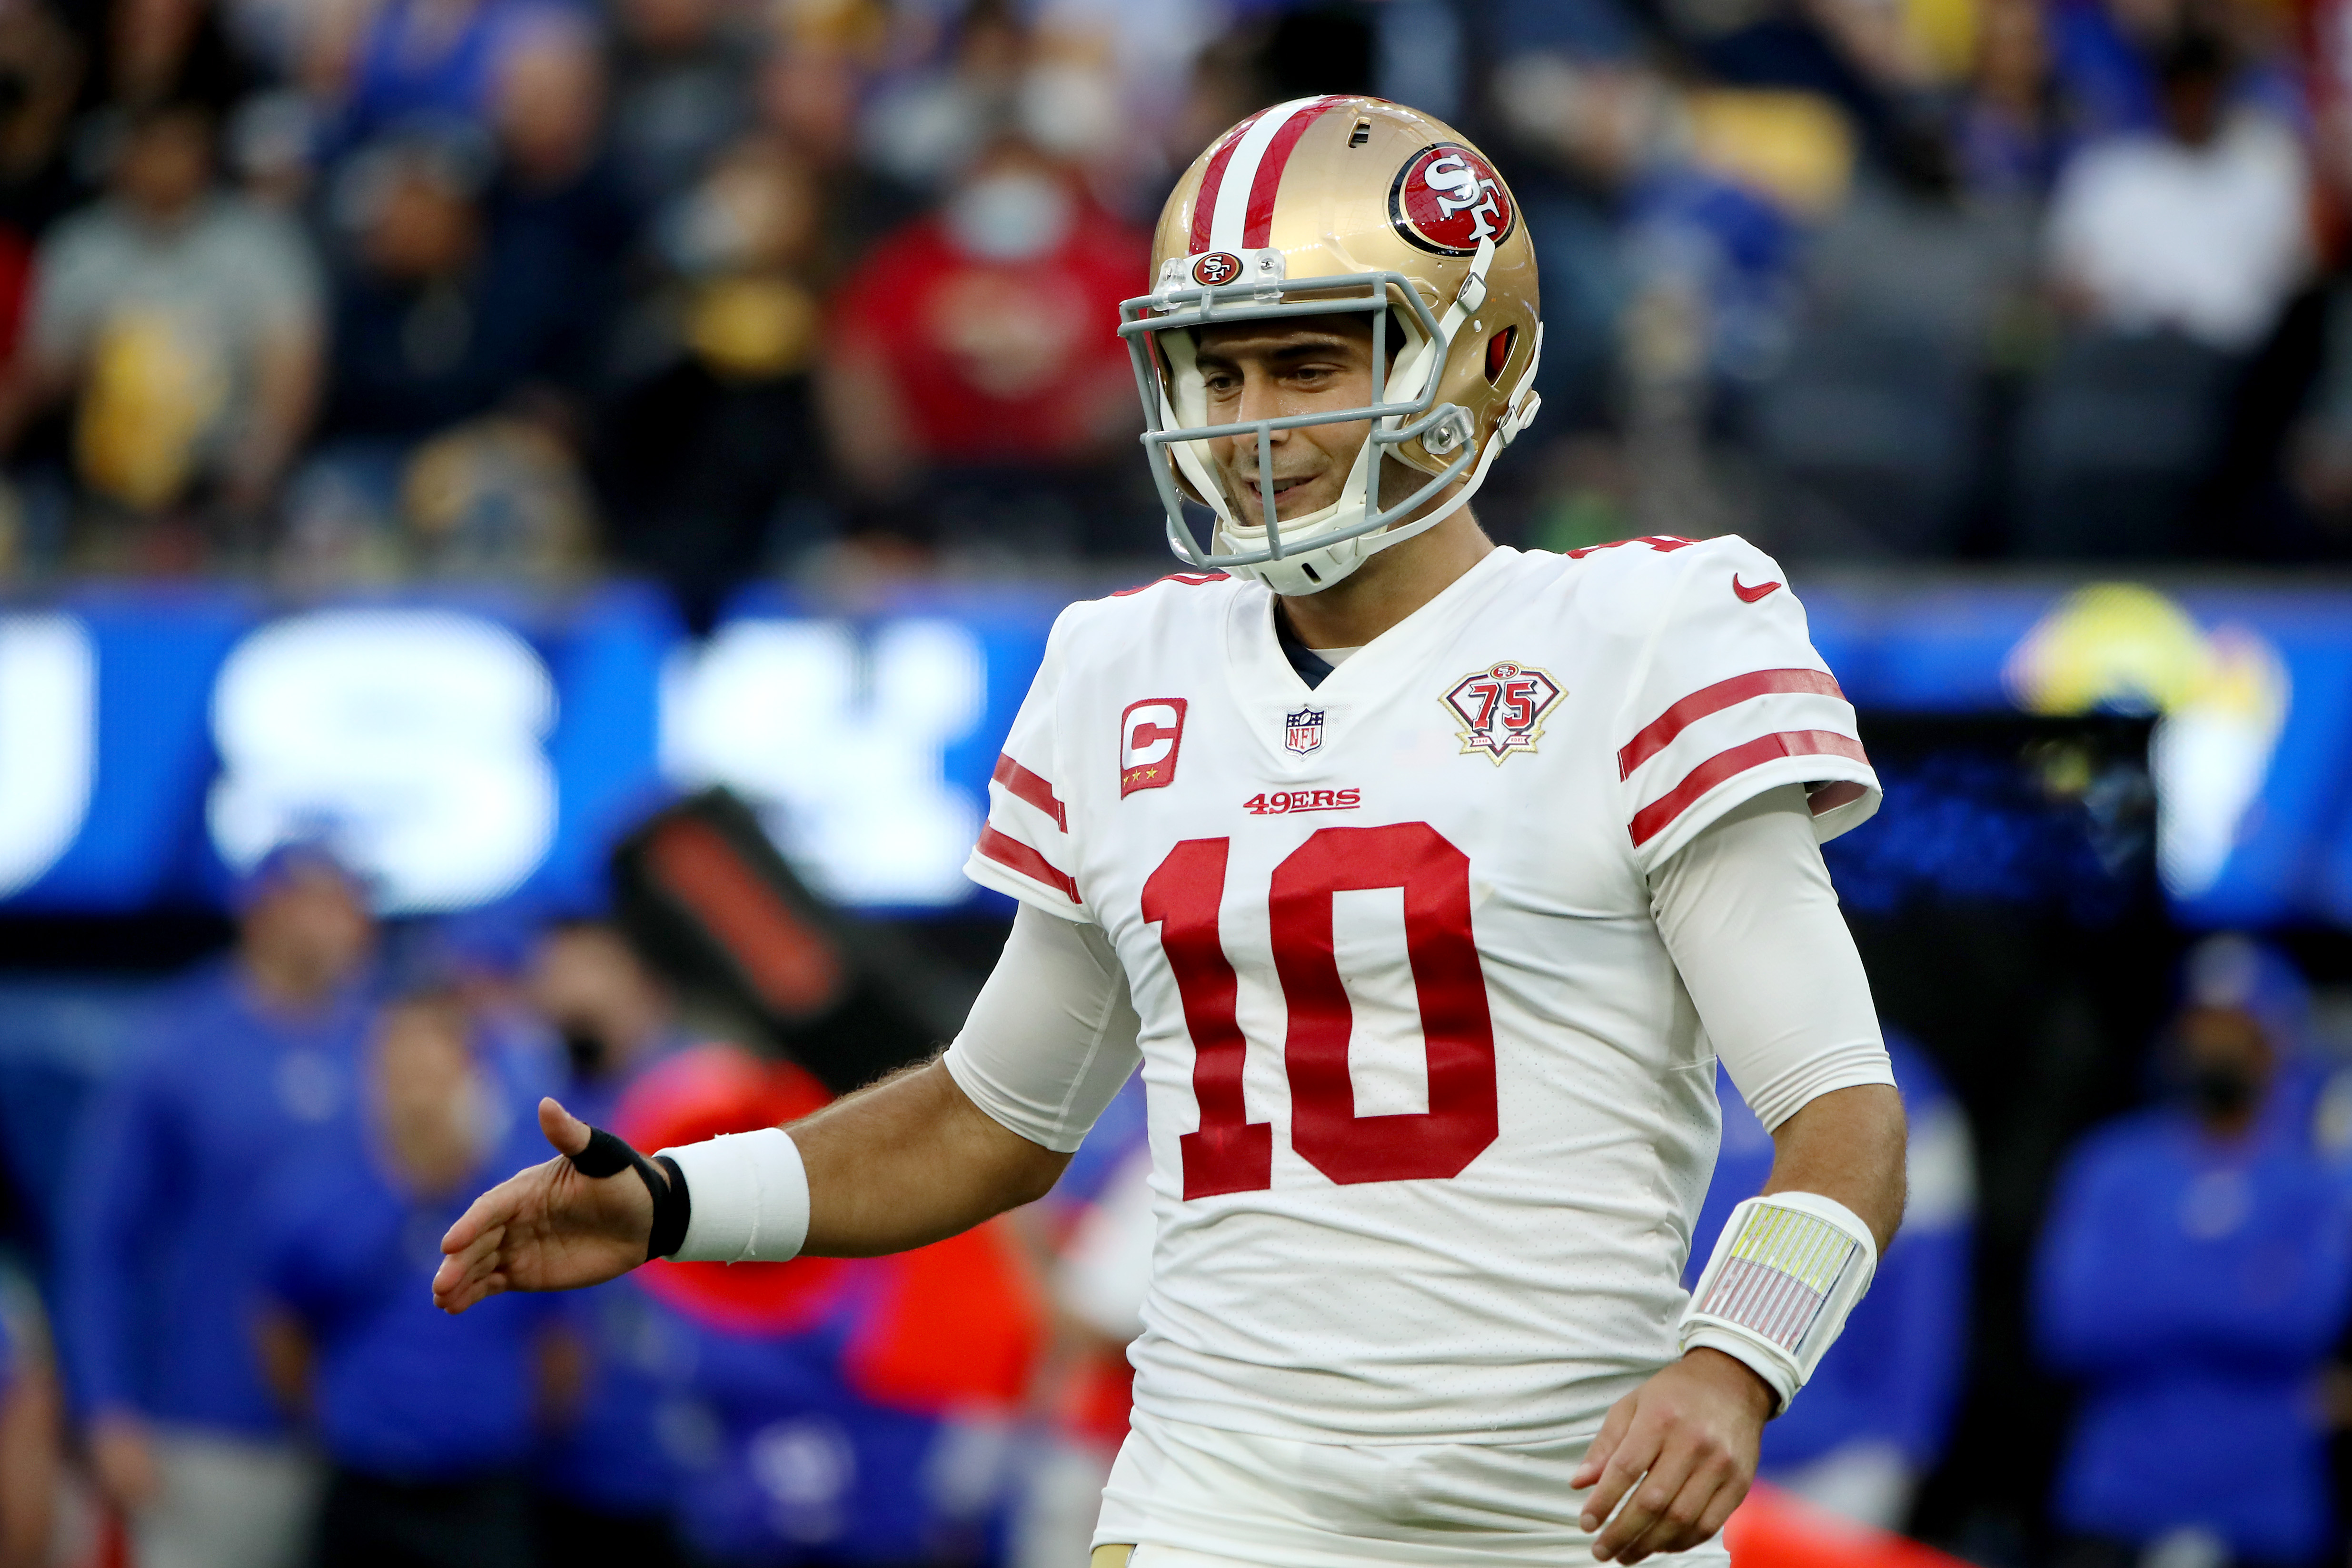 49ers Divisional Round Schedule: San Francisco Next Game Time